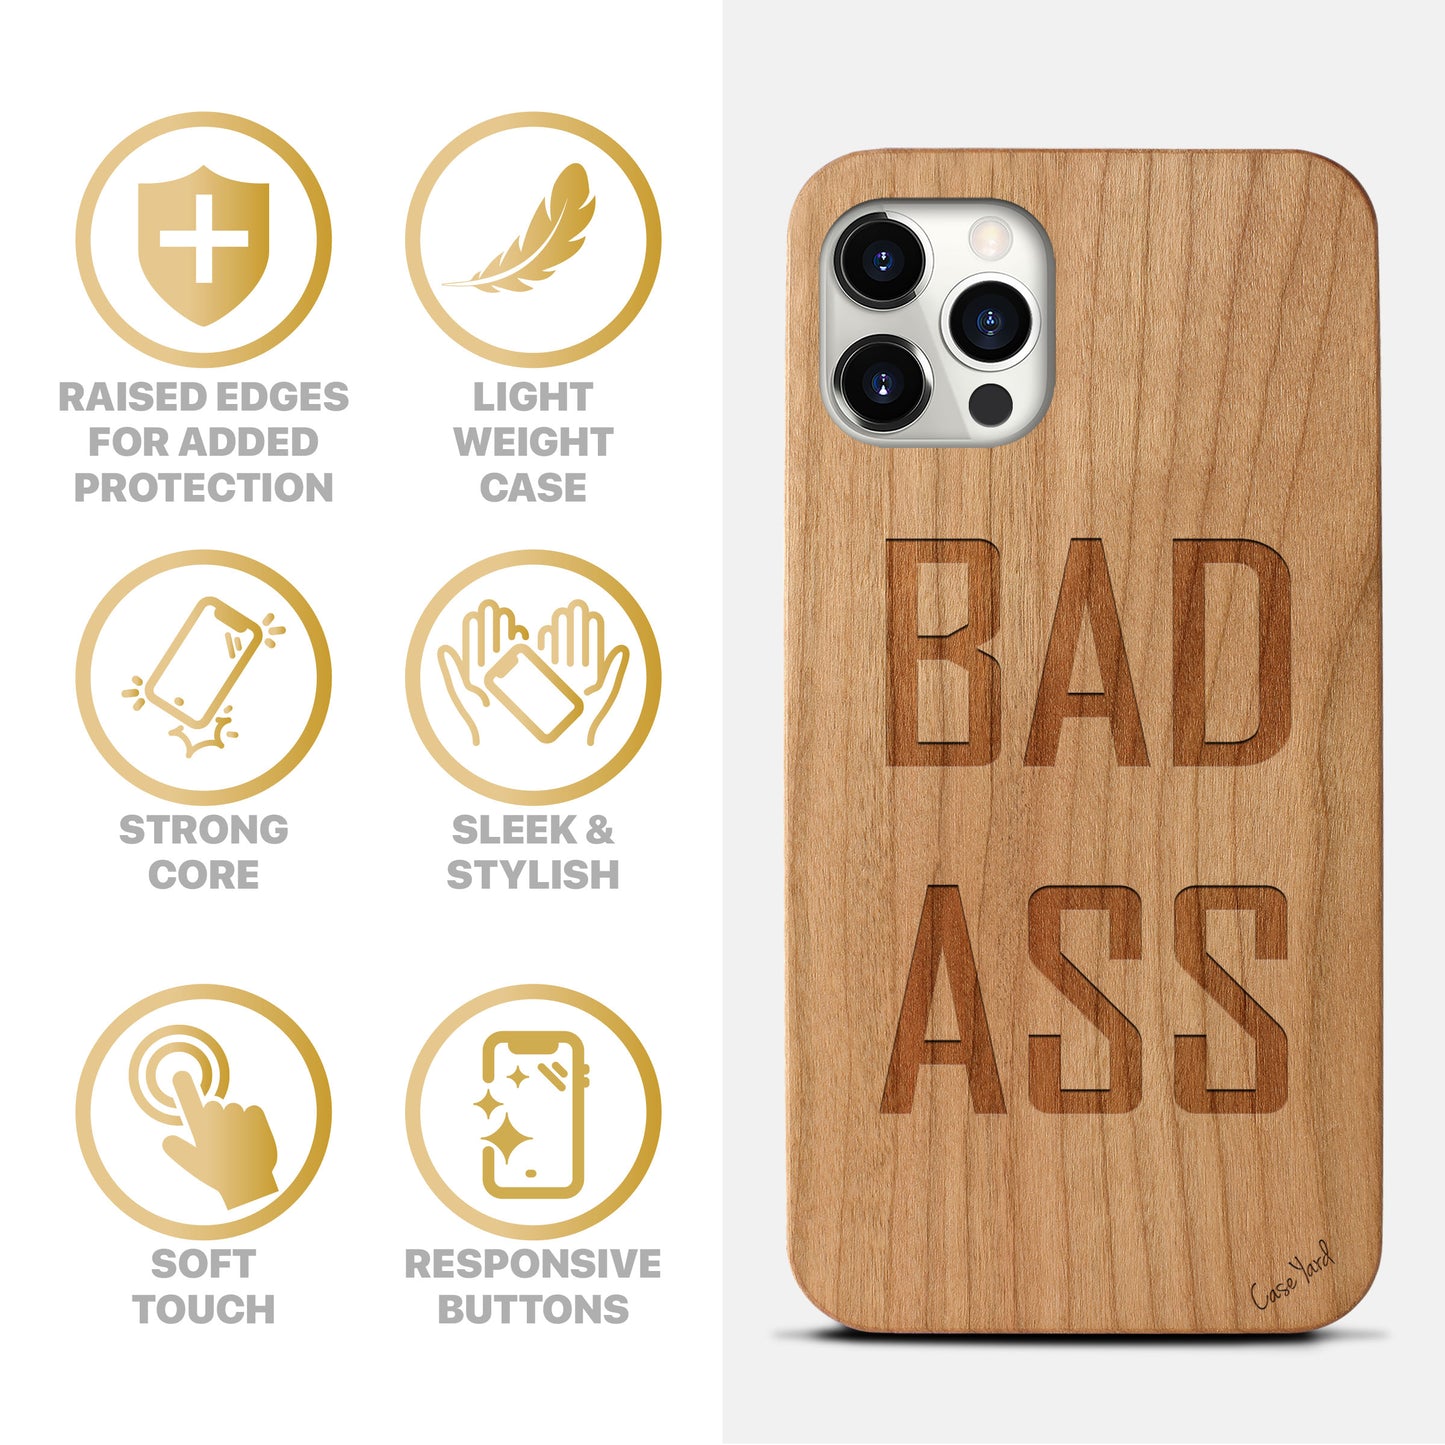 Wooden Cell Phone Case Cover, Laser Engraved case for iPhone & Samsung phone Bad Ass Design